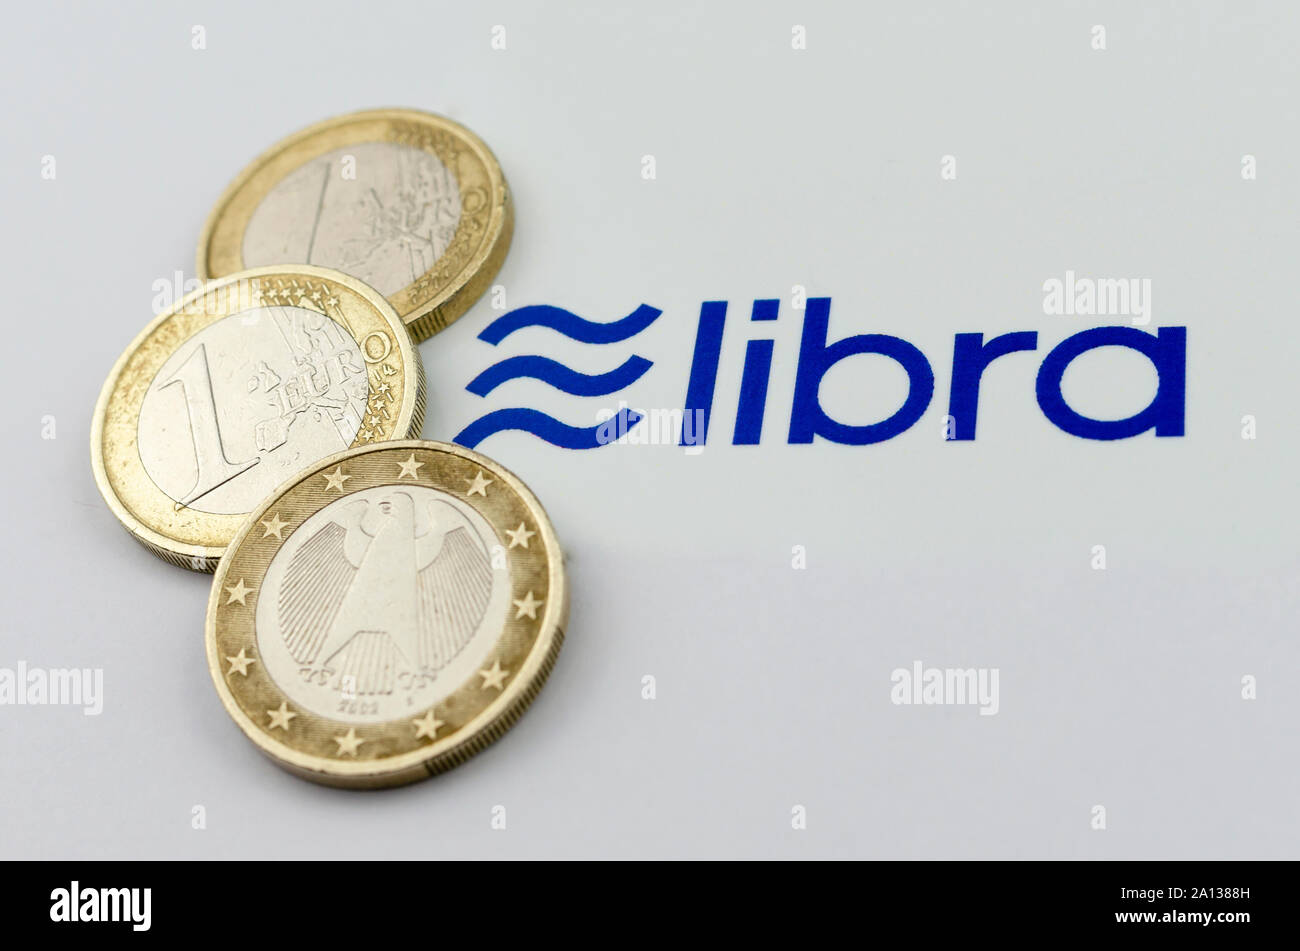 Facebook Libra cryptocurrency logos printed and the Euro coins next to them. Close up photo with shallow depth of field. Stock Photo